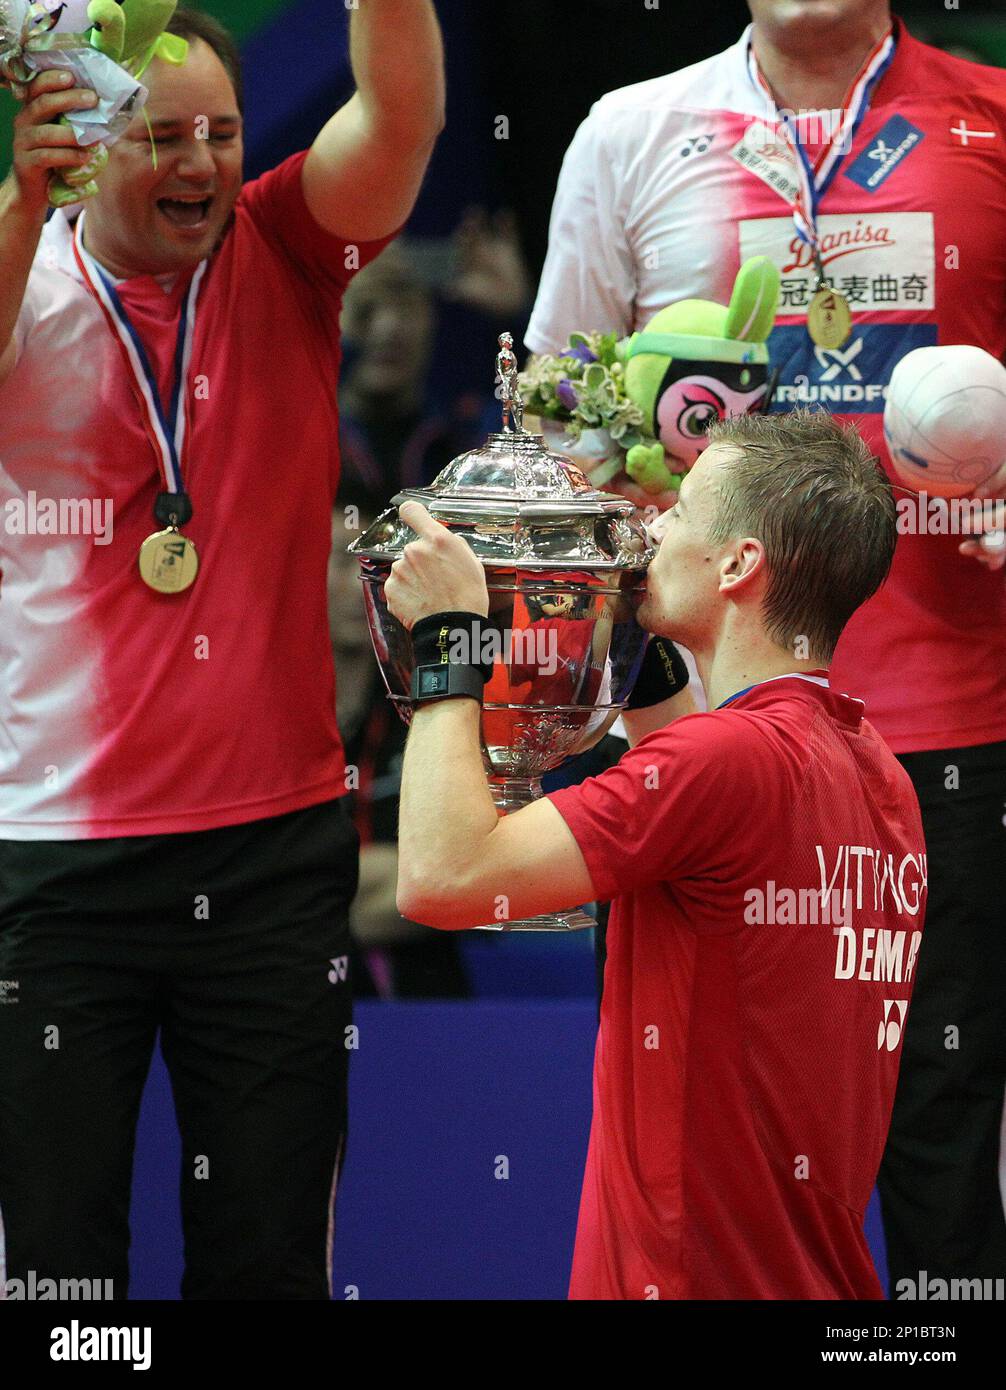 Badminton players of Denmark celebrate during the award ceremony after defeating Indonesia to win the BWF Thomas Cup 2016 in Kunshan city, east Chinas Jiangsu province, 21 May 2016.Denmark beat Indonesia 3-2